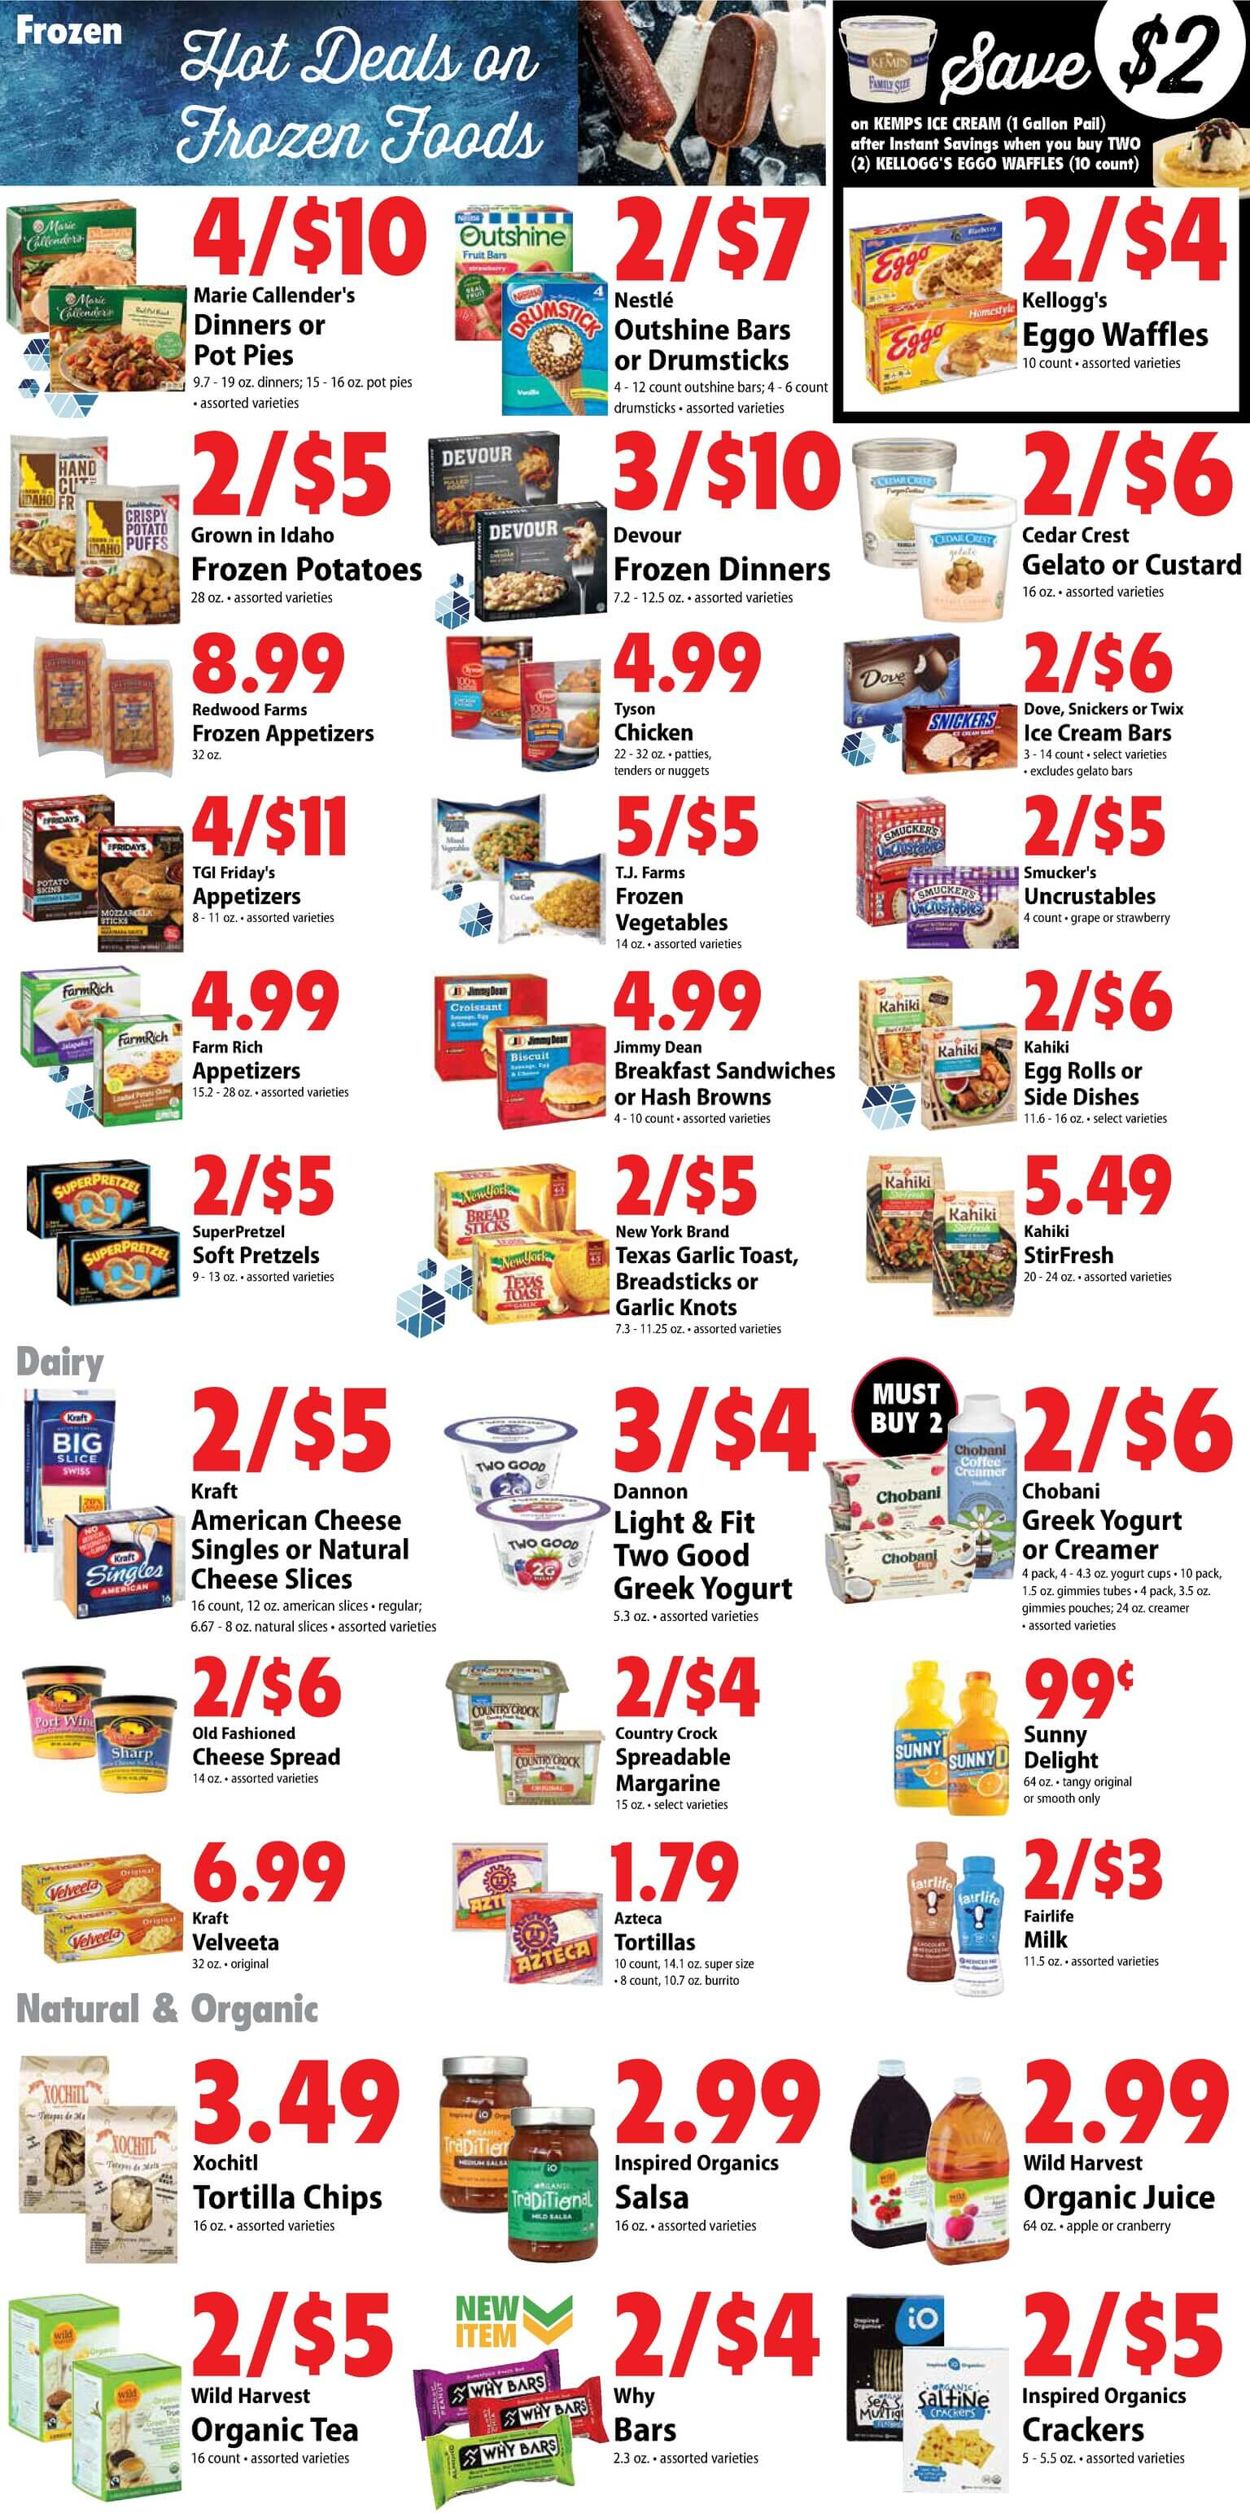 Festival Foods Current weekly ad 03/18 - 03/24/2020 [6] - frequent-ads.com